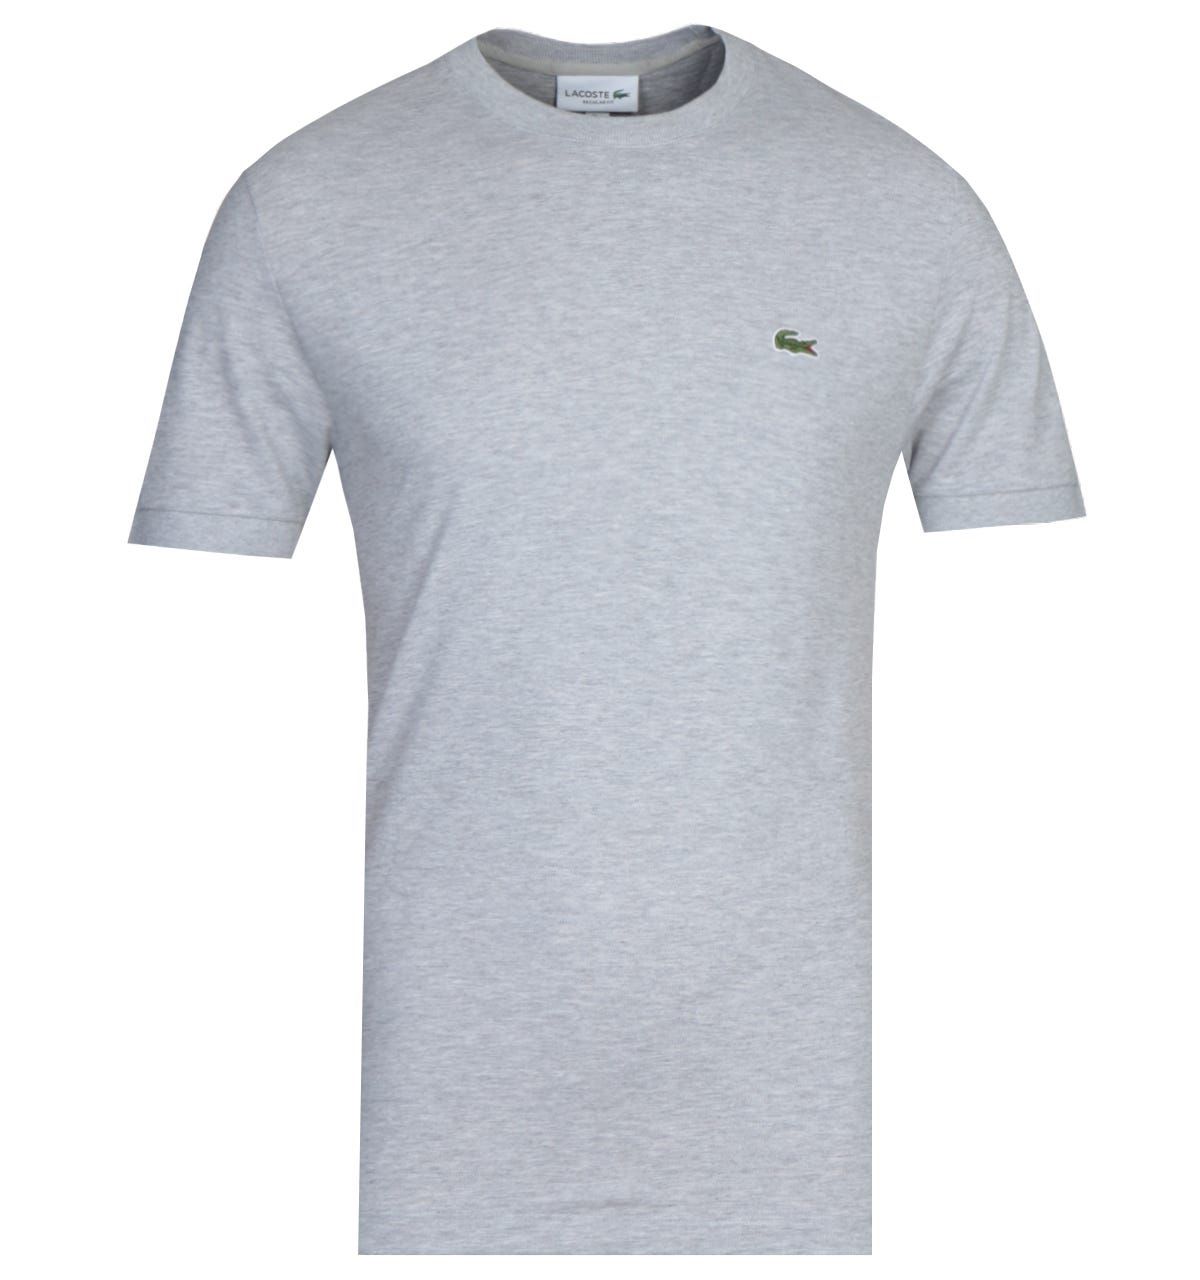 <p>A pure cotton composition crafted by Lacoste. The Lacoste Grey Homme T-Shirt is fitted with a crew neck cut with ribbed trims. The design is finished with the Lacoste logo embroidered on the chest.</p><ul><li>Cotton composition</li><li>Crew neck</li><li>Tonal stitching</li><li>Ribbed trims</li><li>Lacoste logo embroidered on chest</li></ul><p>Style & Fit:</p><ul><li>Regular fit</li><li>Fits true to size</li></ul><p>Fabric Composition & Care:</p><ul><li>100% Cotton</li><li>Machine washable</li></ul>